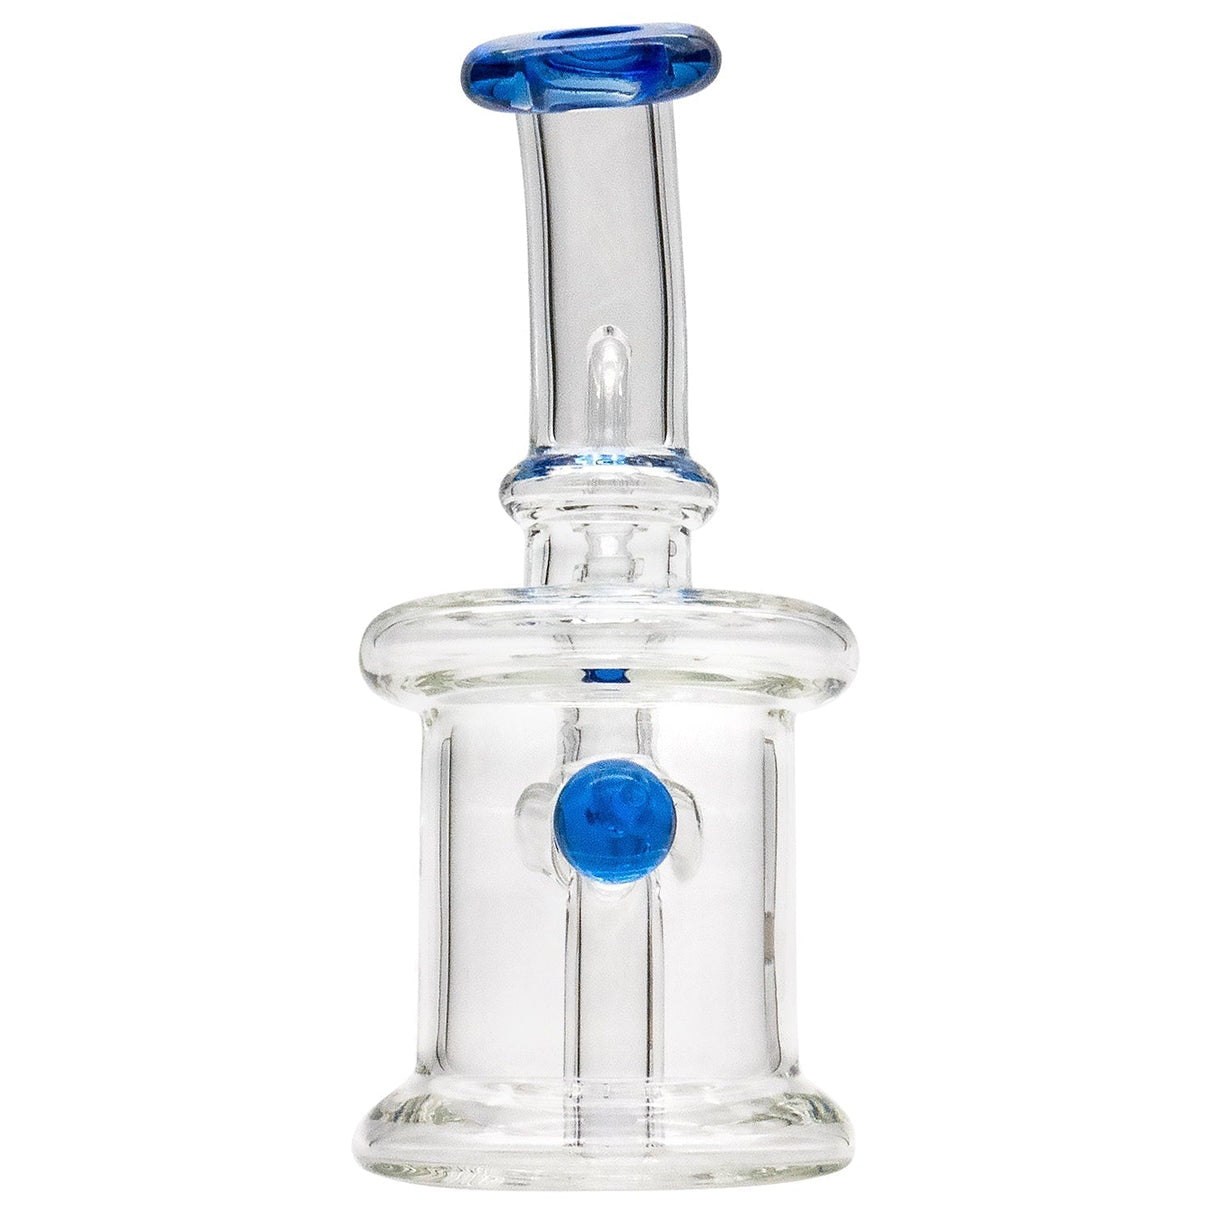 Glassic Compact Barrel Banger Hanger Rig with blue accents, front view on white background